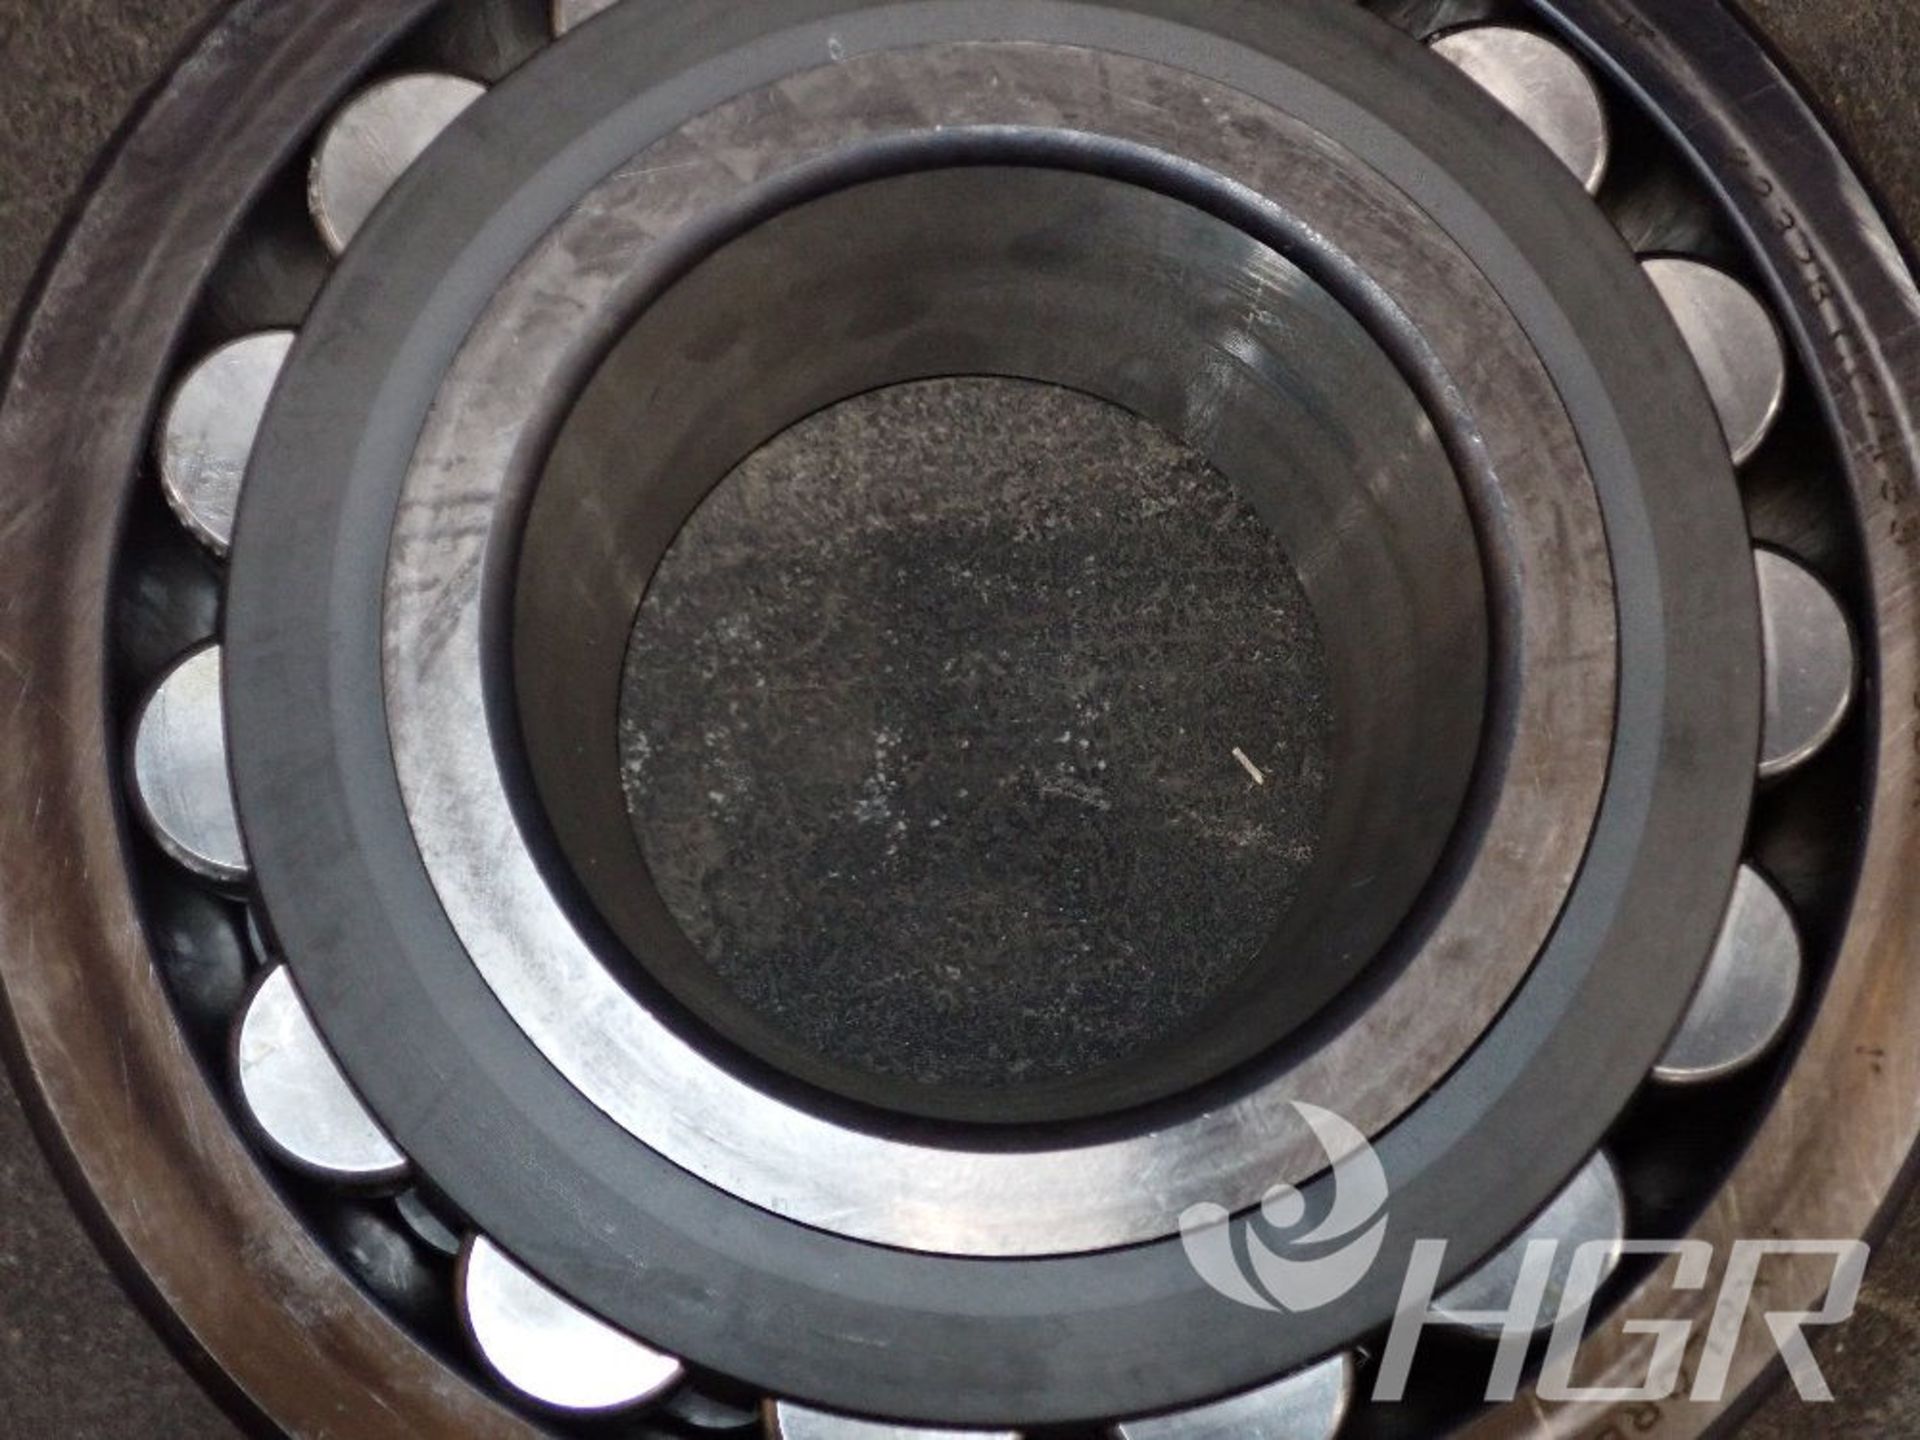 SKF BEARING, Model 22328 CC/W33, Date: n/a; s/n n/a, Approx. Capacity: 5", Power: n/a, Details: - Image 4 of 6